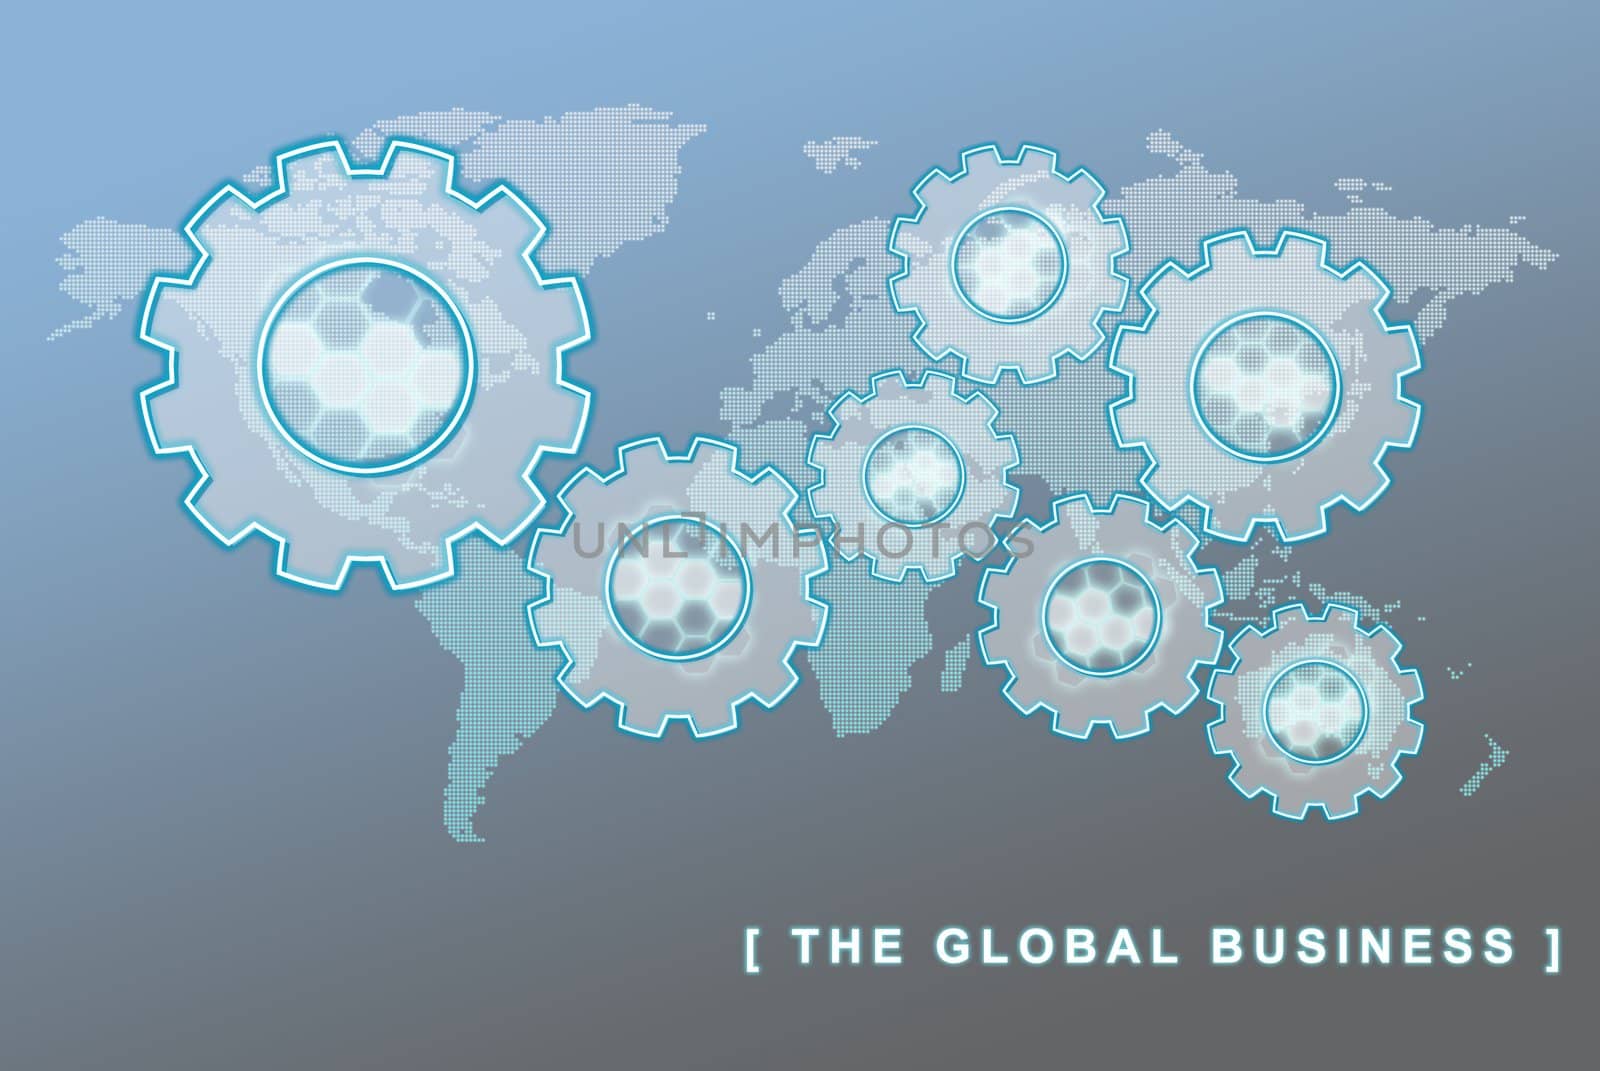 The global economy business concept, can be use for related global business, finance futuristic minimalist concepts